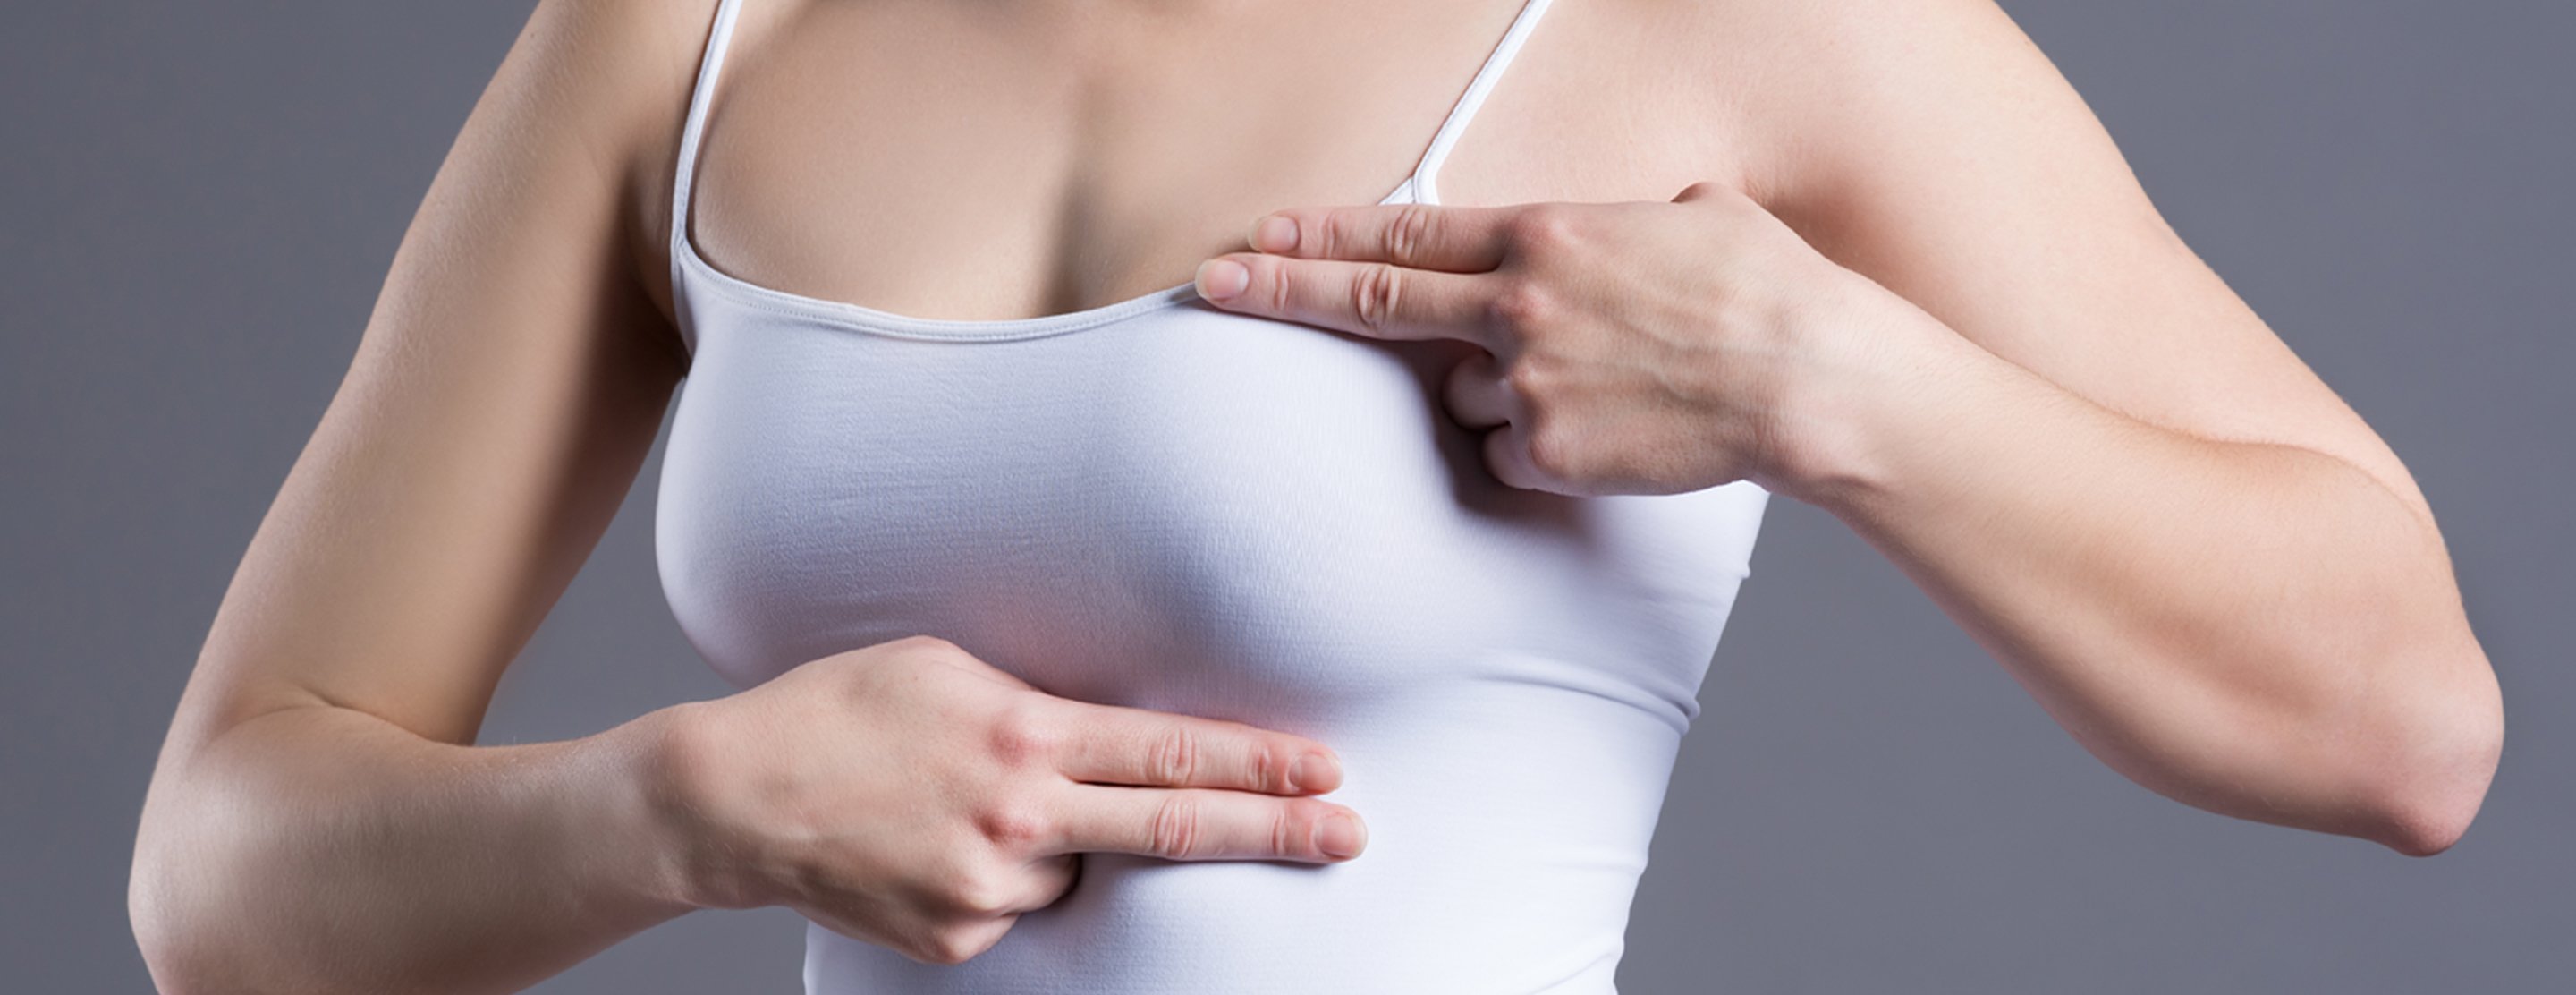 Basic Facts About Breast Health: Breast Self Exams